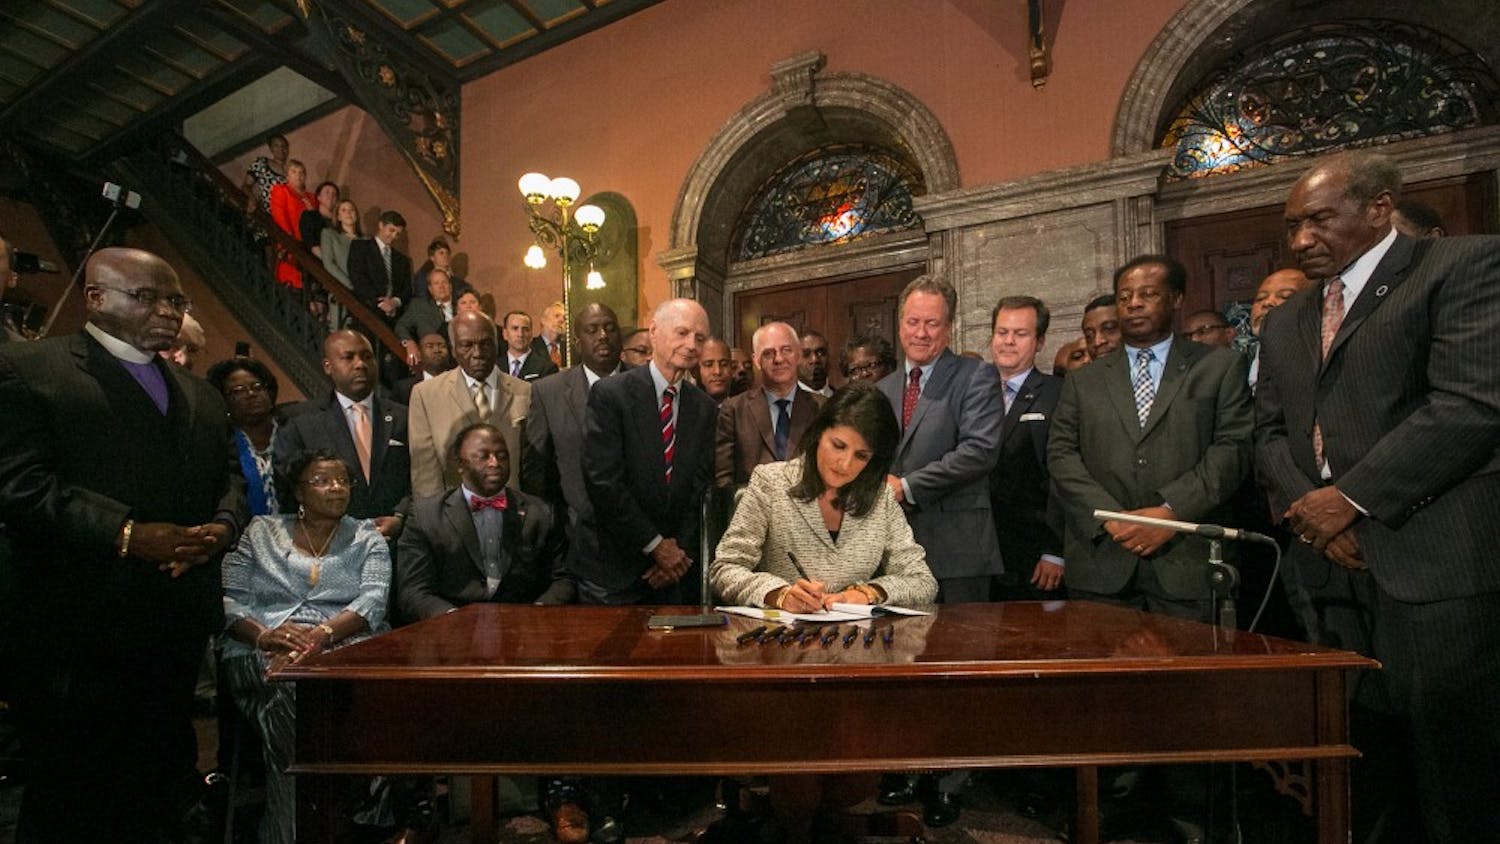 South Carolina Gov. Nikki Haley, surrounded by three former governors, some family members of the slain nine and many legislators, signs the bill to remove the Confederate flag from the South Carolina State House grounds on Thursday, July 9, 2015, in Columbia, S.C. (Tim Dominick/The State/TNS)